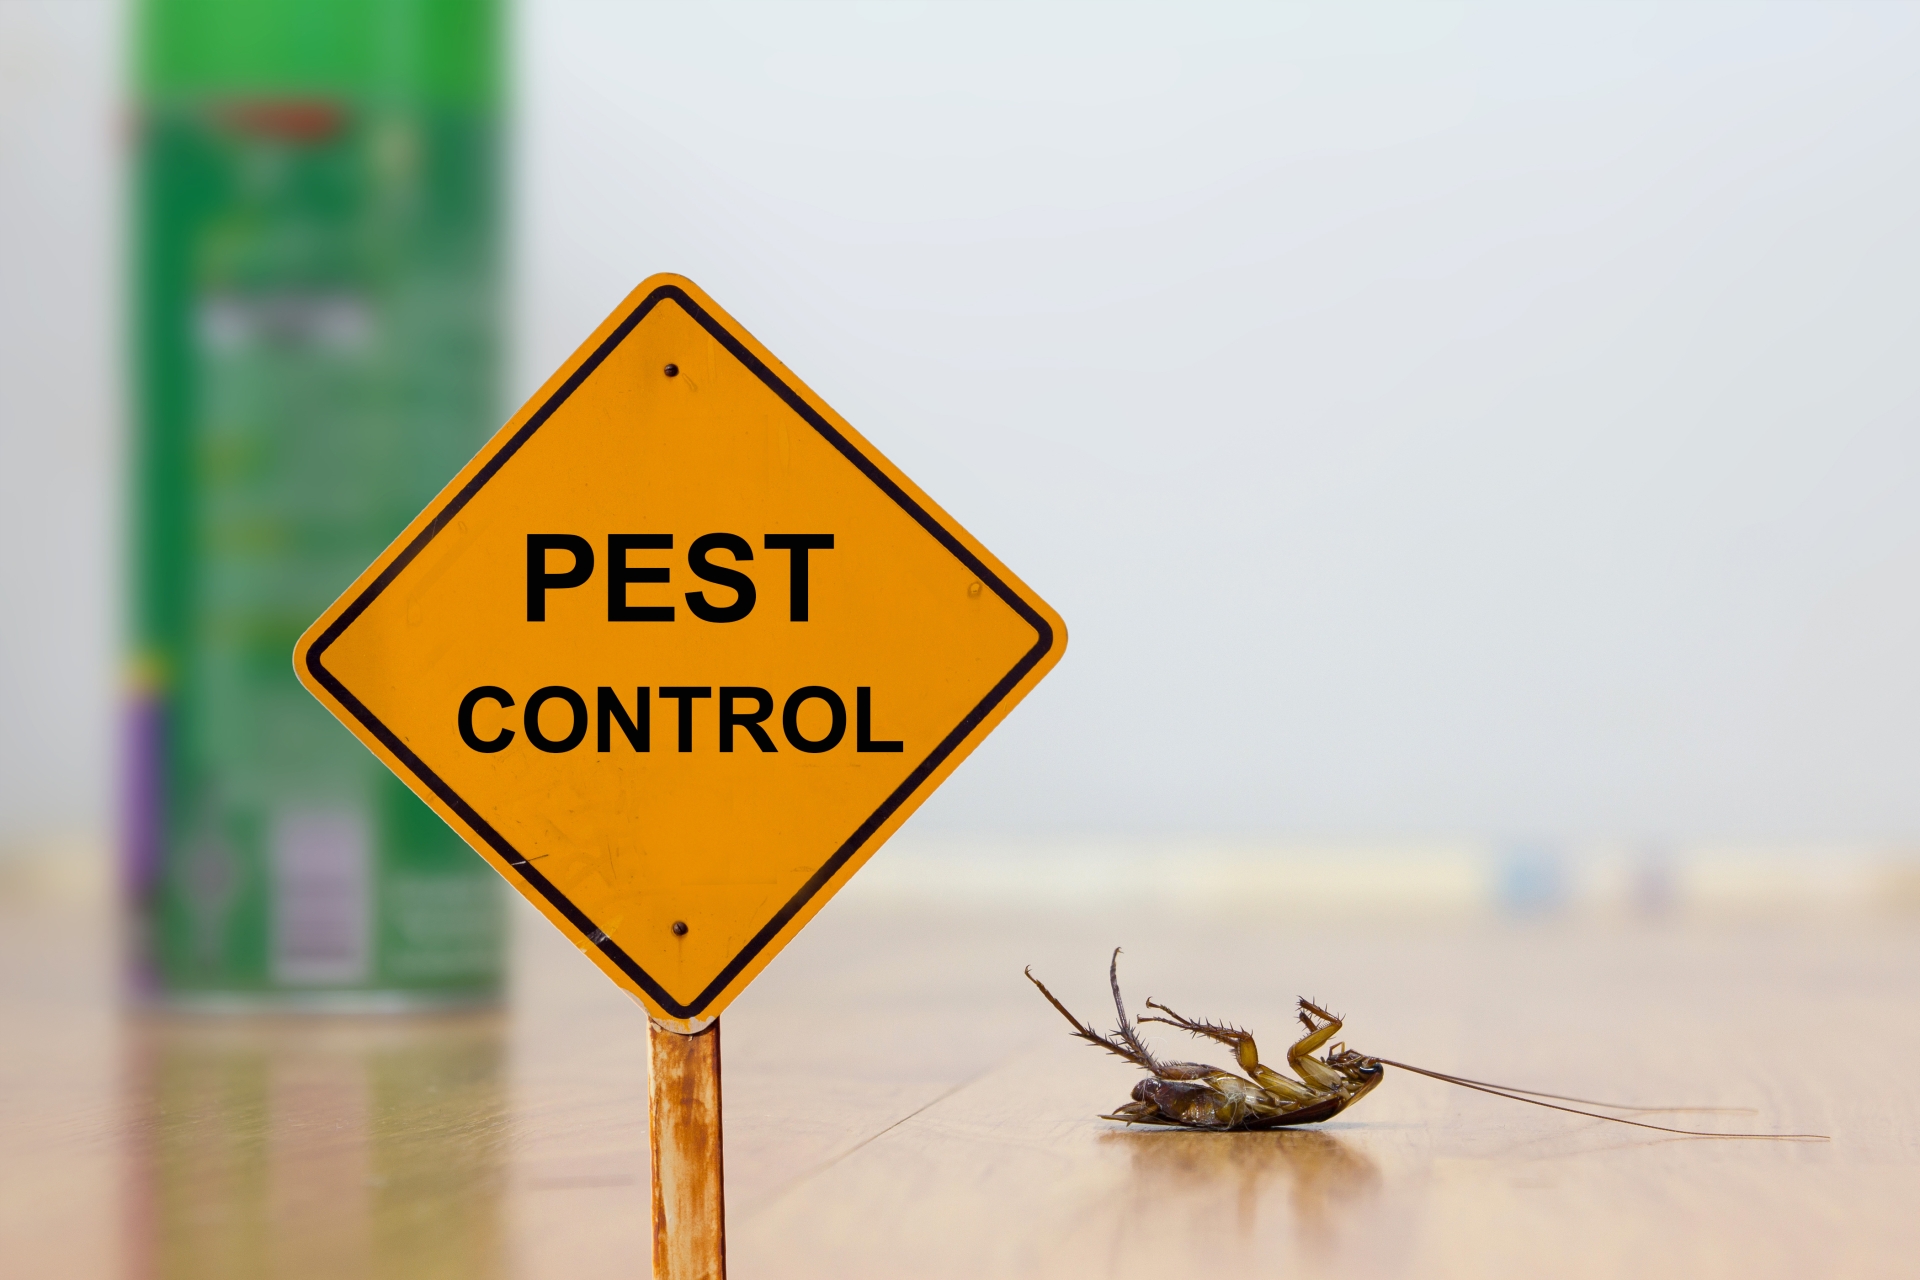 24 Hour Pest Control, Pest Control in Chelsea, SW3. Call Now 020 8166 9746